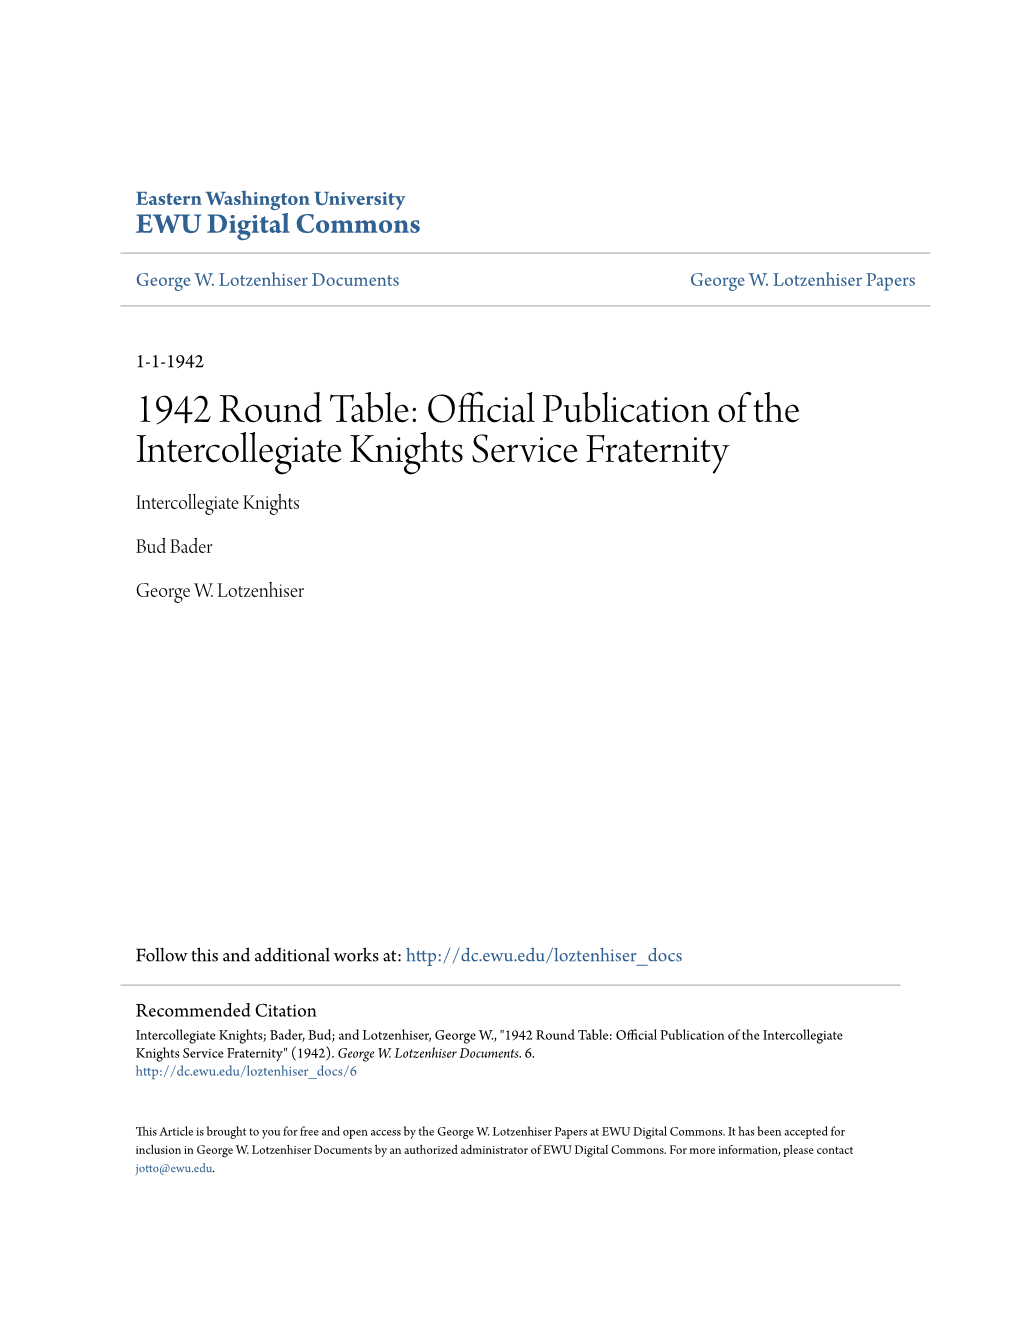 1942 Round Table: Official Publication of the Intercollegiate Knights Service Fraternity Intercollegiate Knights